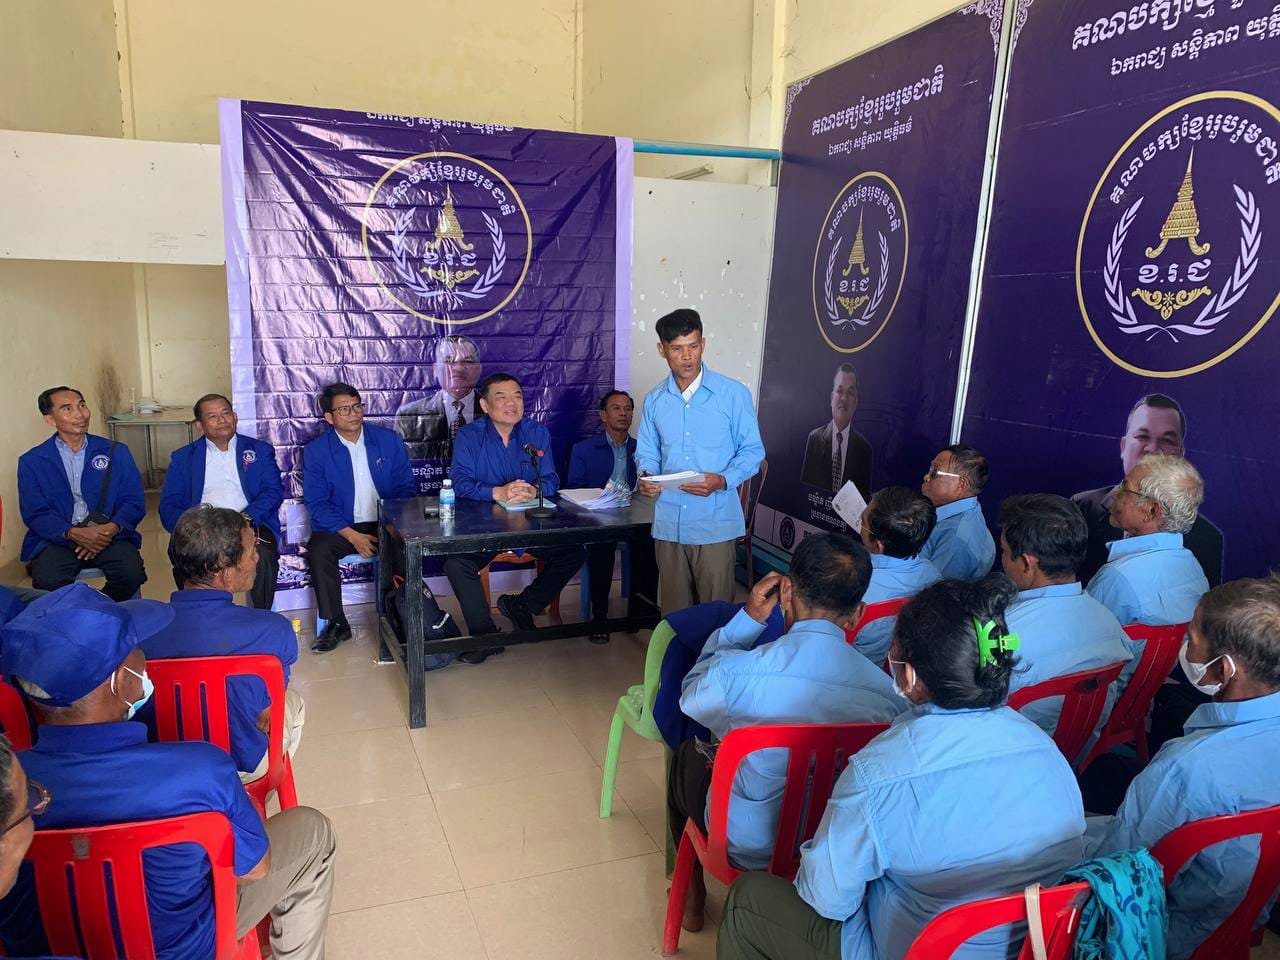 Nhek Bun Chhay at a meeting in Takeo where he inducted new members on August 17, 2022. (Nhek Bun Chhay's Facebook page)